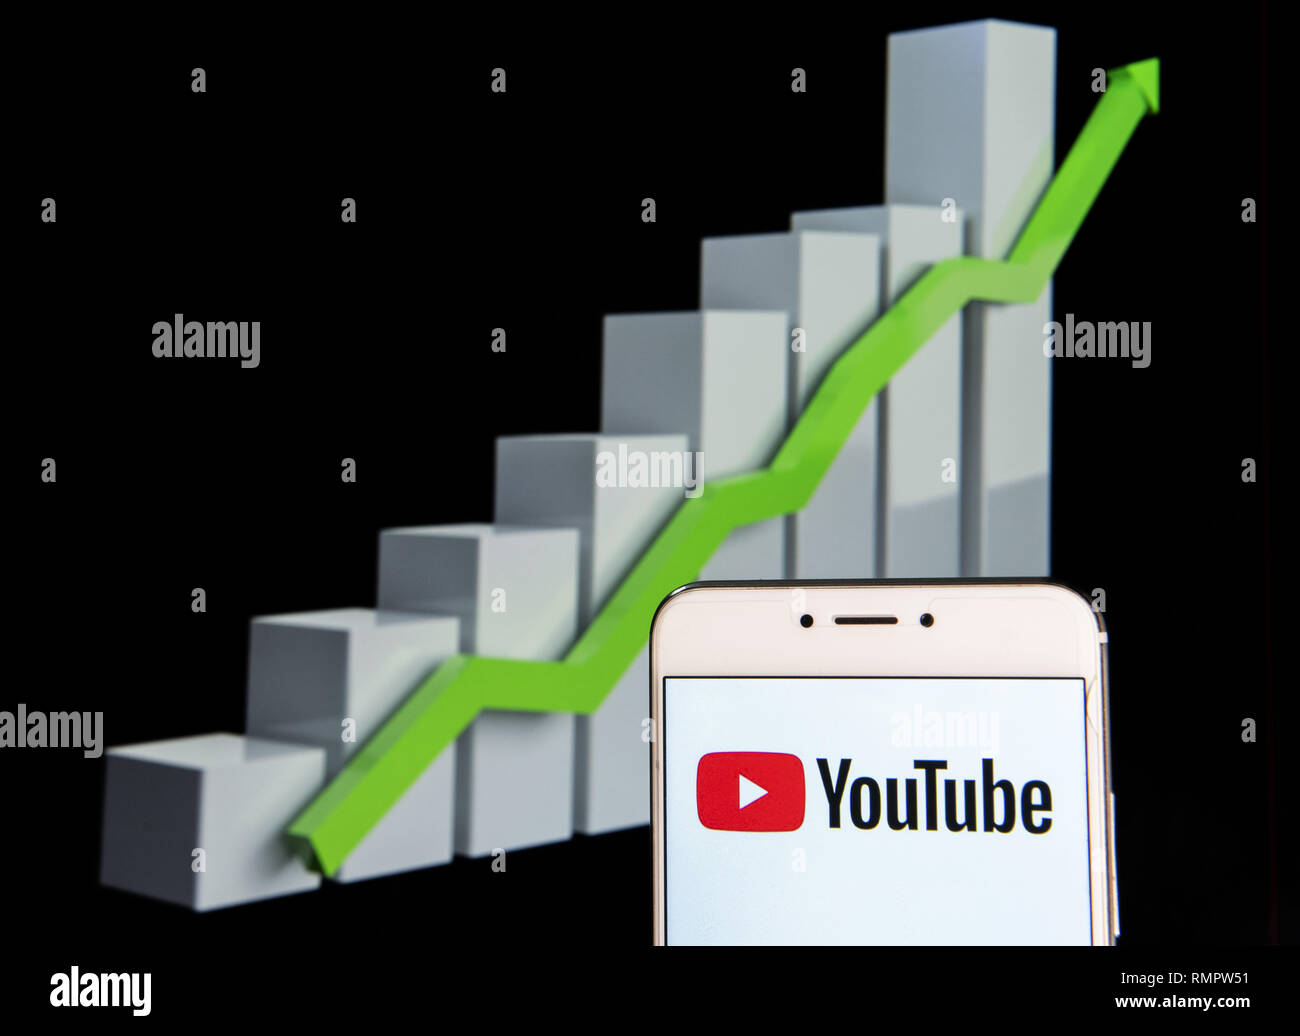 Hong Kong. 11th Feb, 2019. American video-sharing website Youtube logo is  seen on an android mobile device with an ascent growth chart in the  background. Credit: Miguel Candela/SOPA Images/ZUMA Wire/Alamy Live News